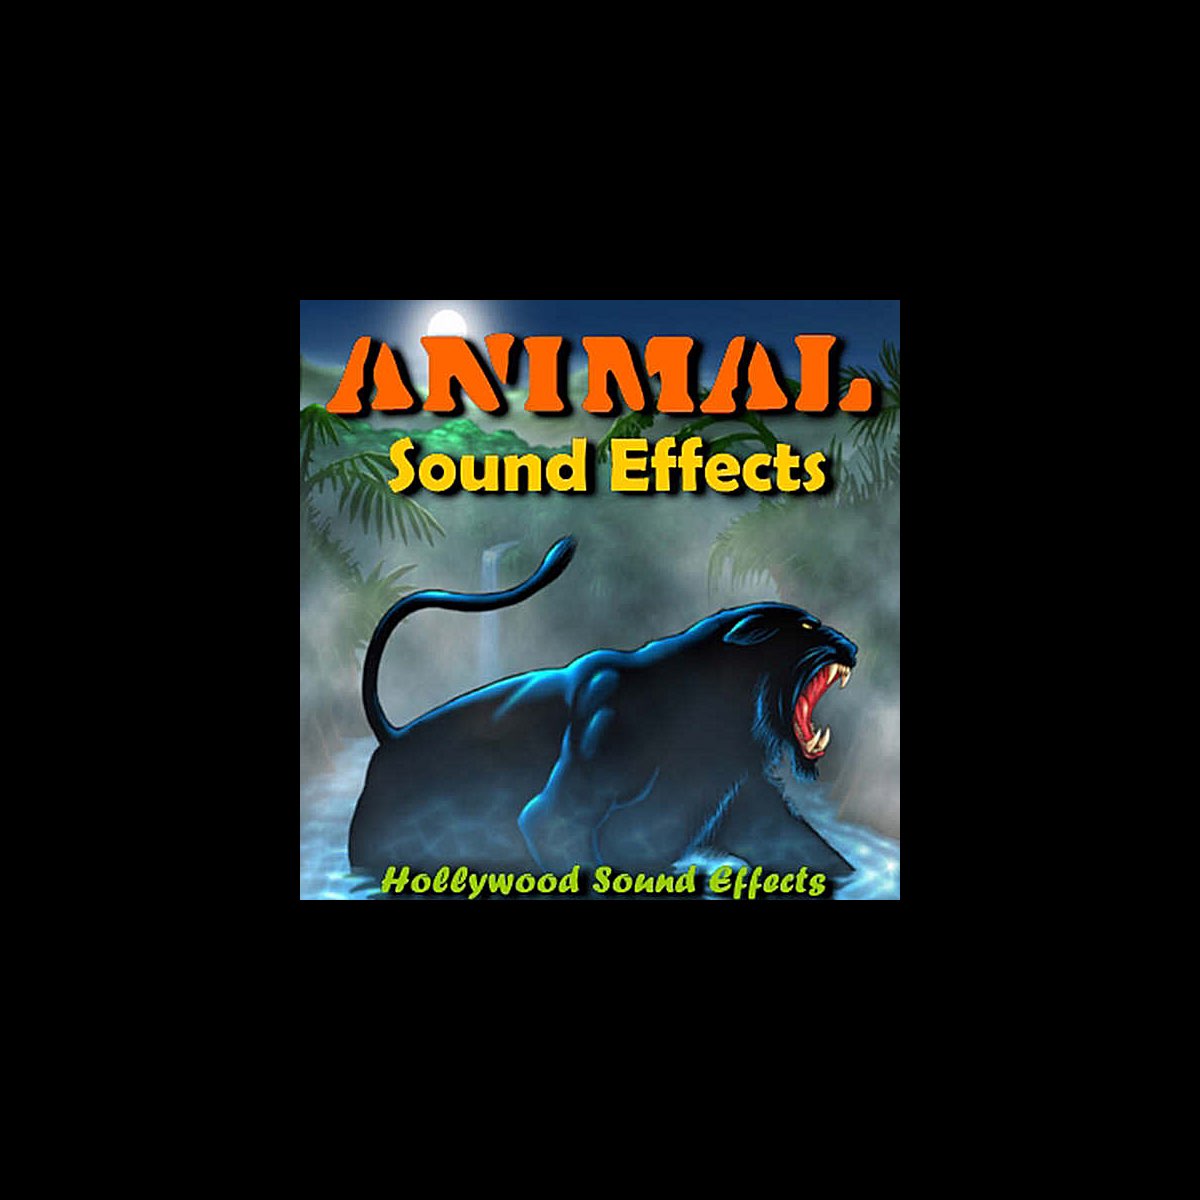 Animal Sound Effects by Hollywood Studio Sound Effects on Apple Music